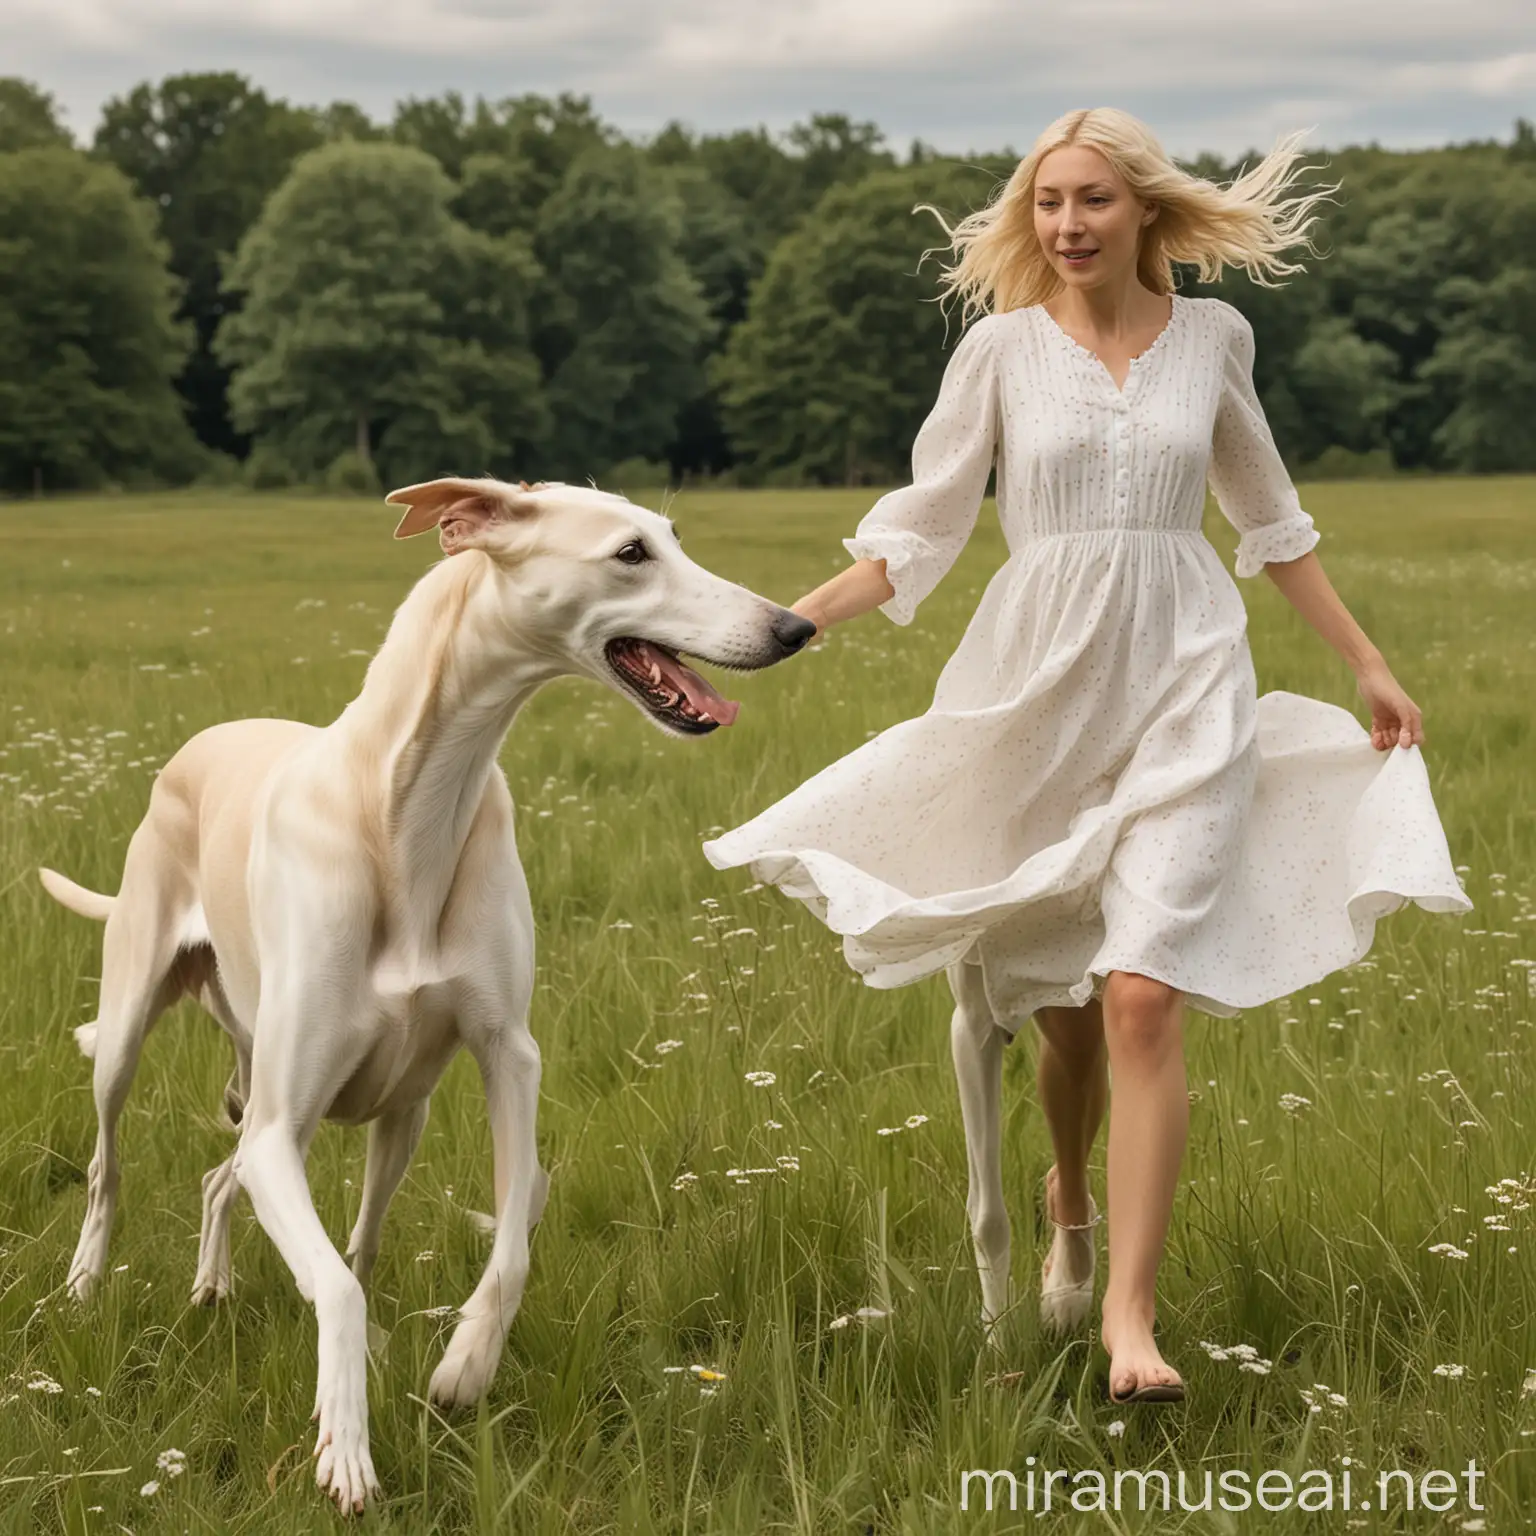 Blonde Woman Running with White Greyhound in Meadow